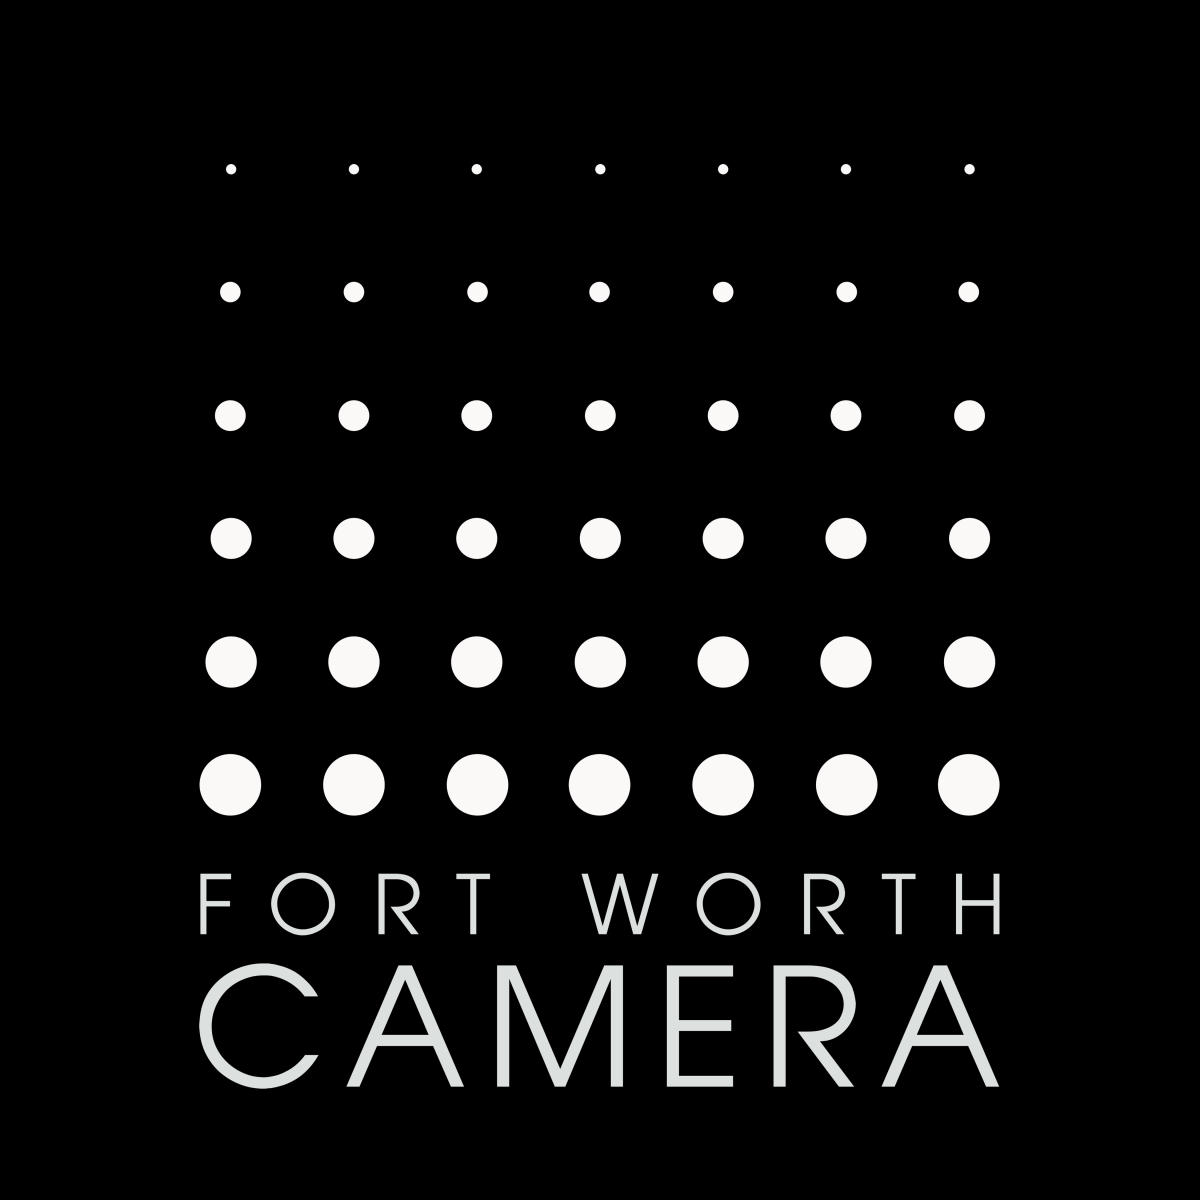 On top of a black background is a quite square of graduated dots and sans serif text reading "Fort Worth Camera"